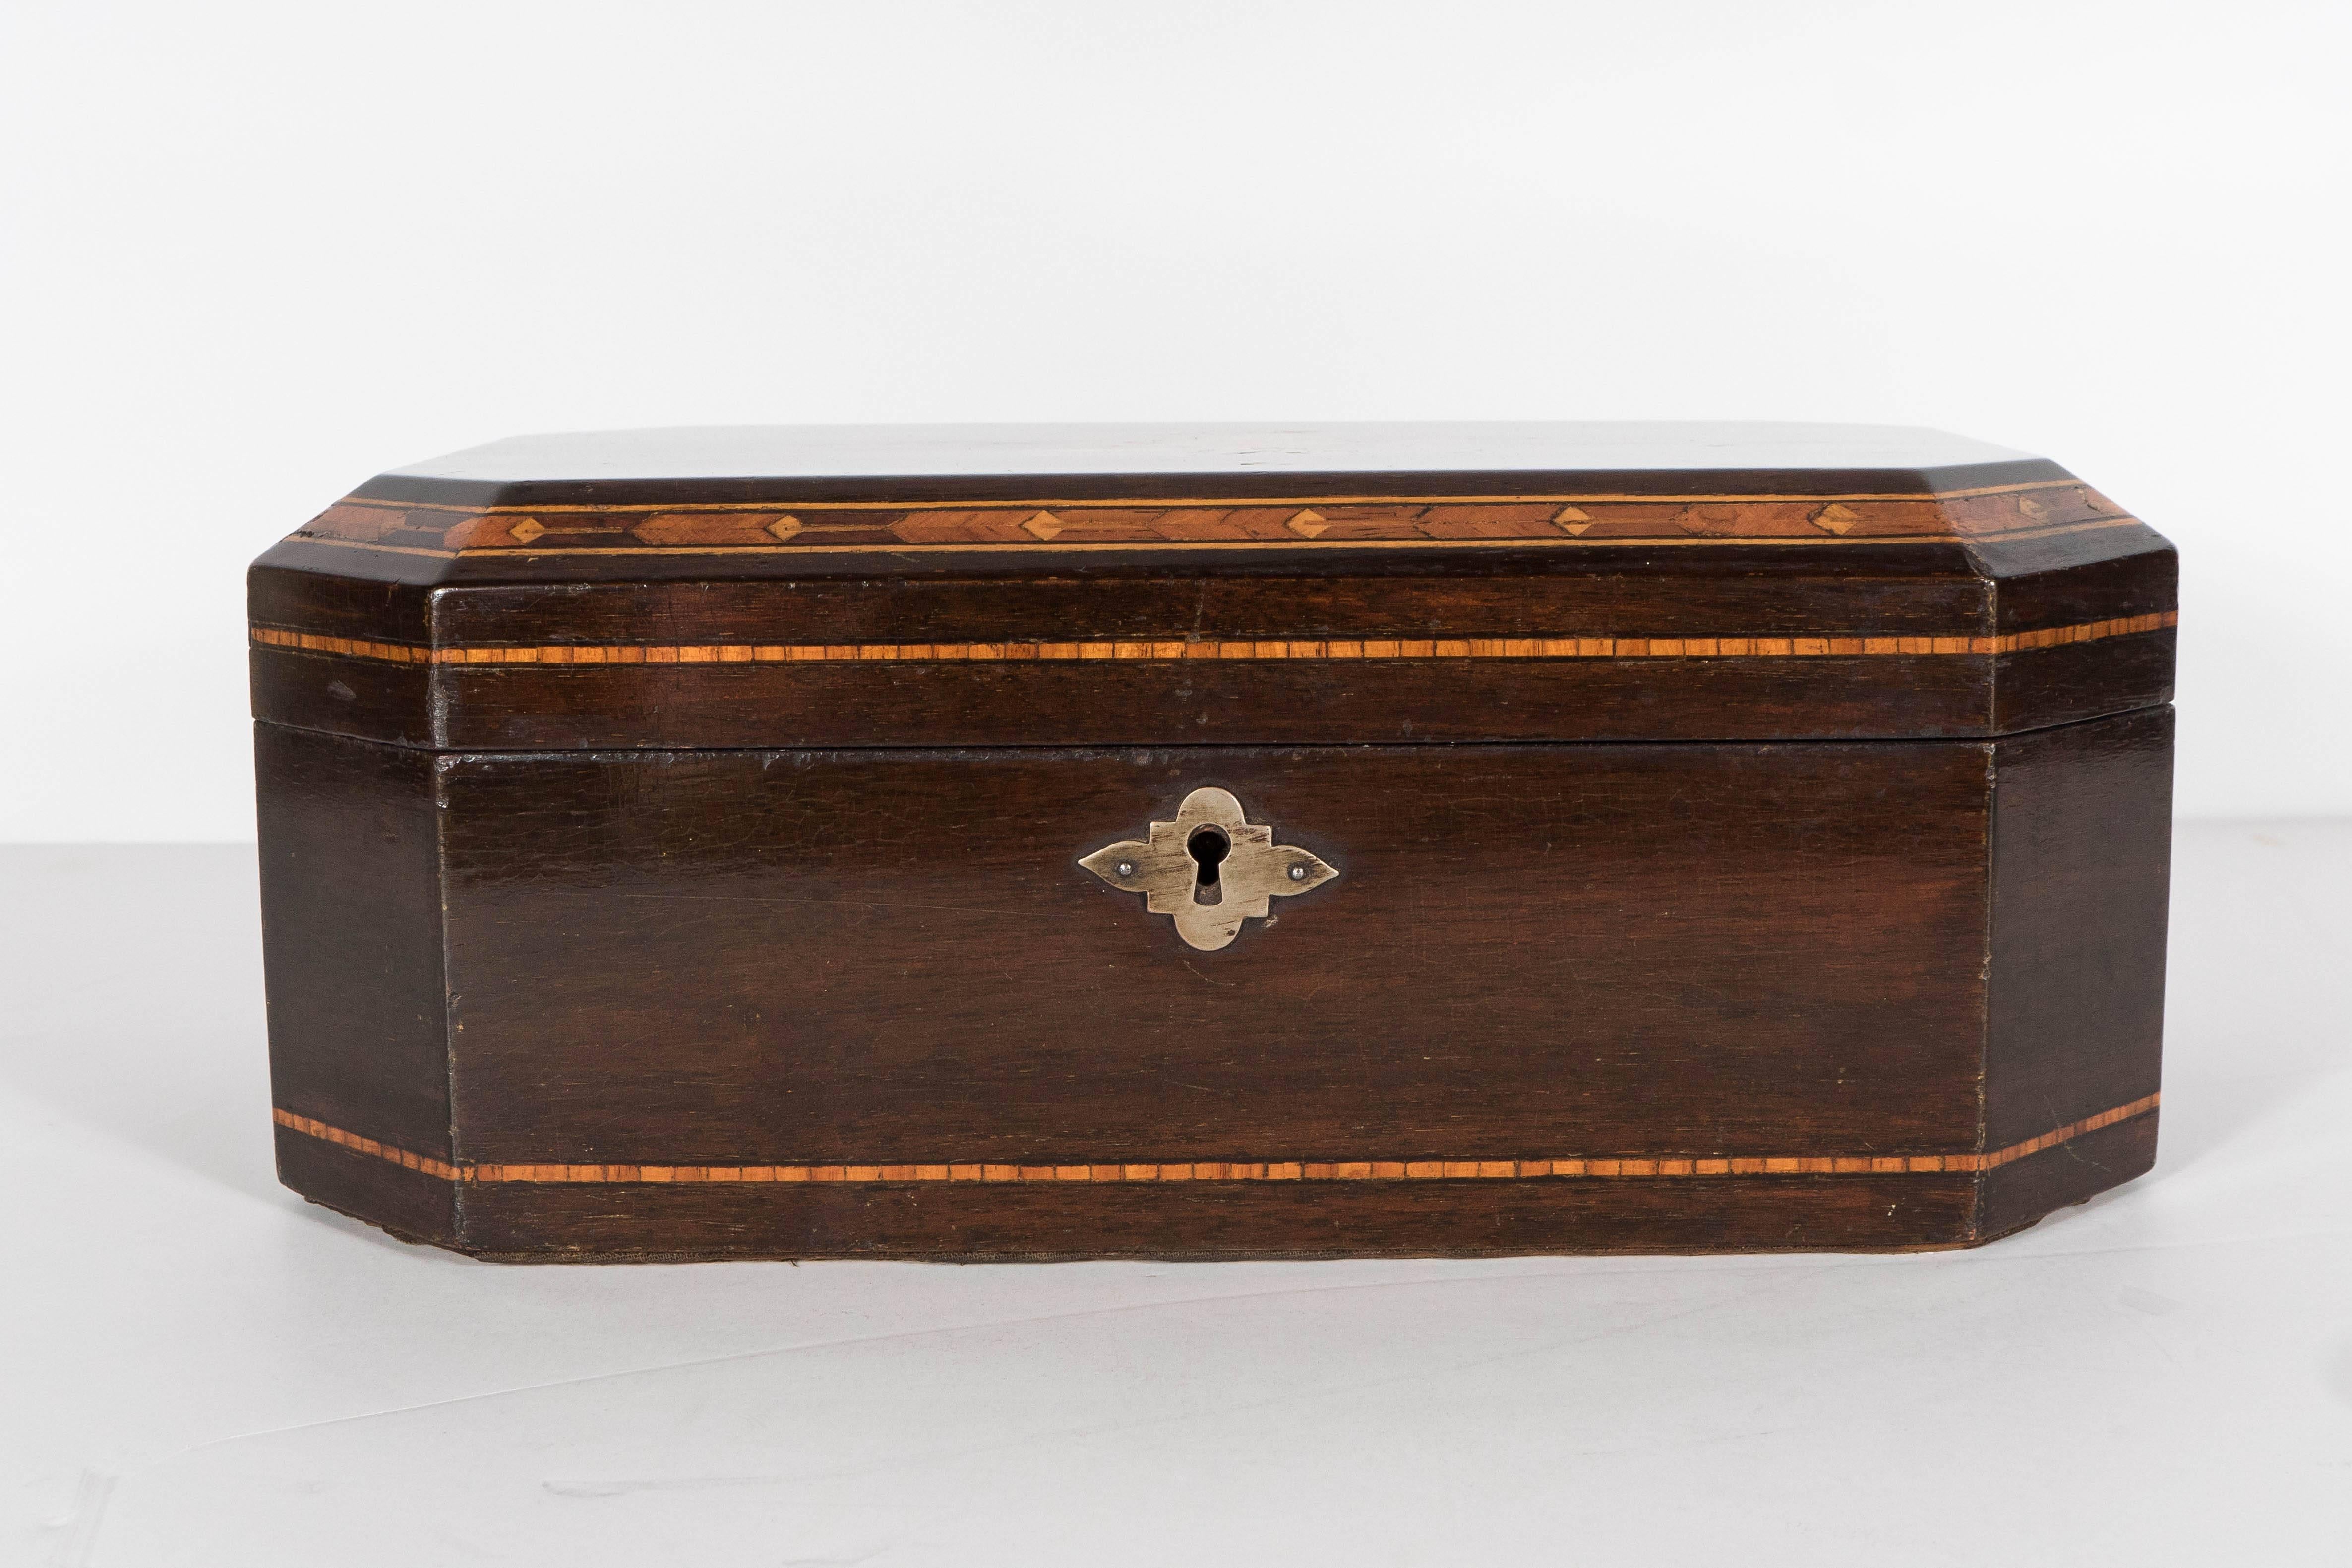 This exquisite mahogany box features an elongated octagonal form with inlaid detailing of exotic walnut, holly and rosewood. The center of the box is inlaid with a rose and branch motif. It also includes a hand-forged tin interior and a recurring